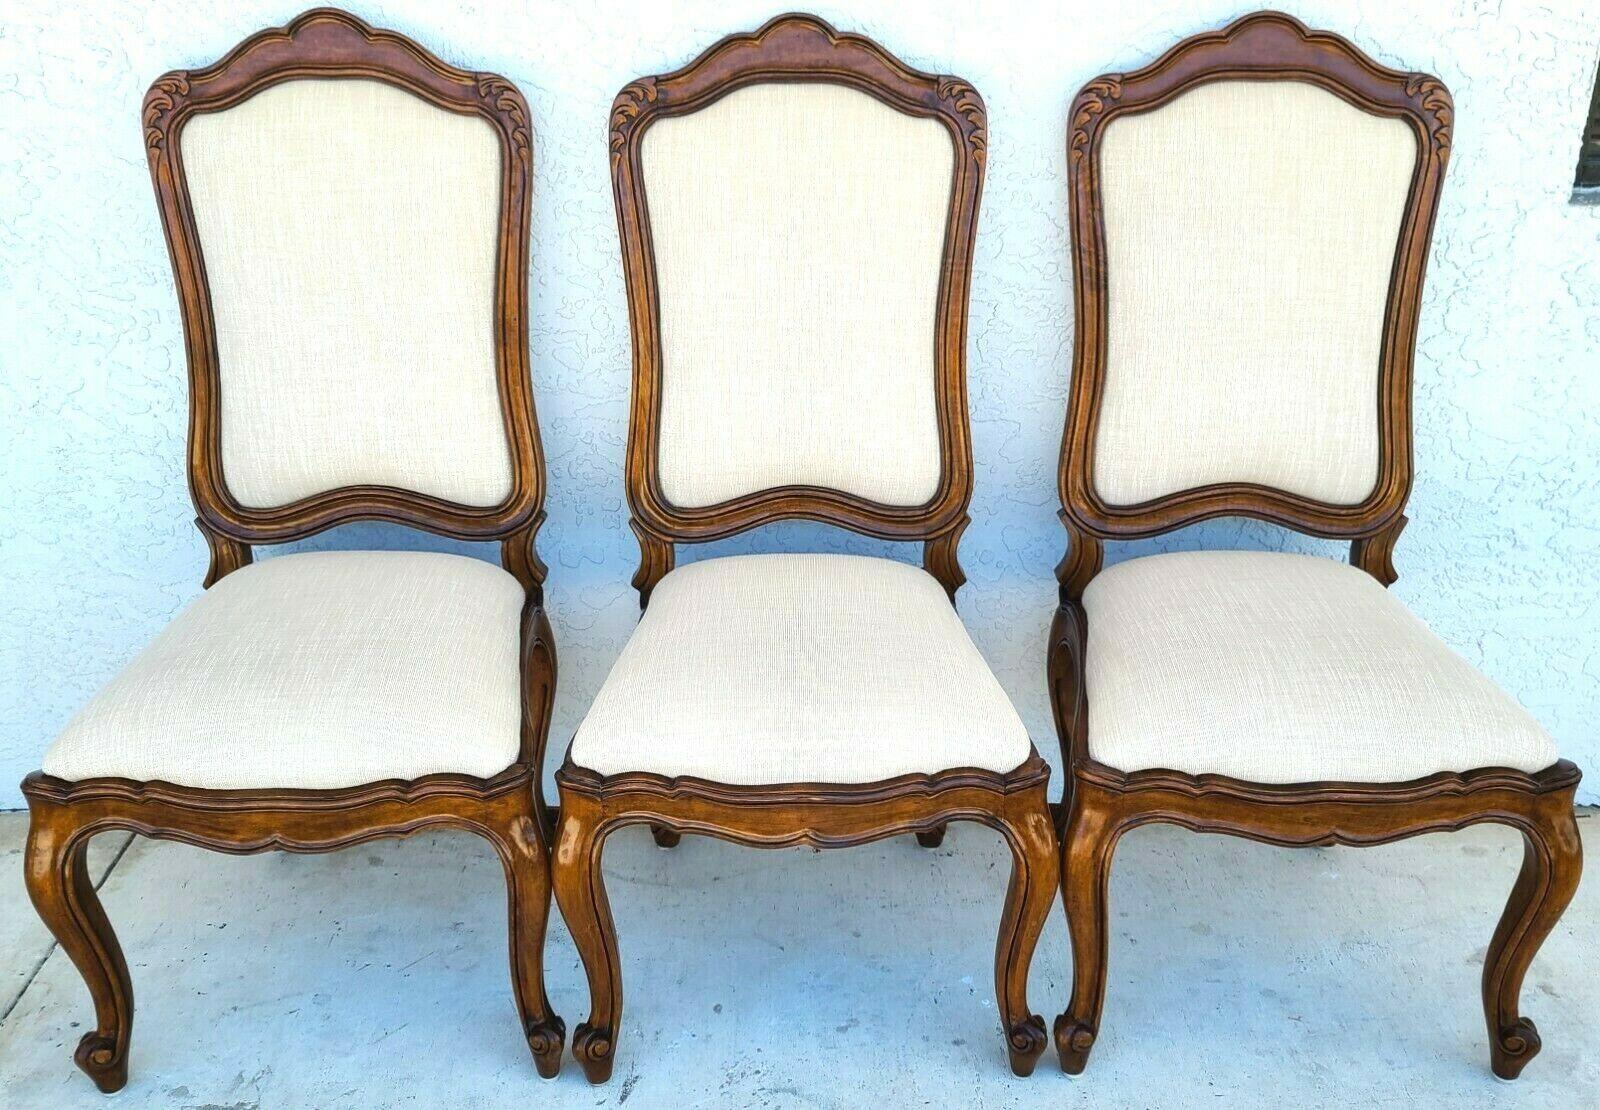 For full item description be sure to click on CONTINUE READING at the bottom of this listing.

Offering one of our recent palm beach estate fine furniture acquisitions of a
set of (6) French provincial mahogany dining chairs by Bau Furniture